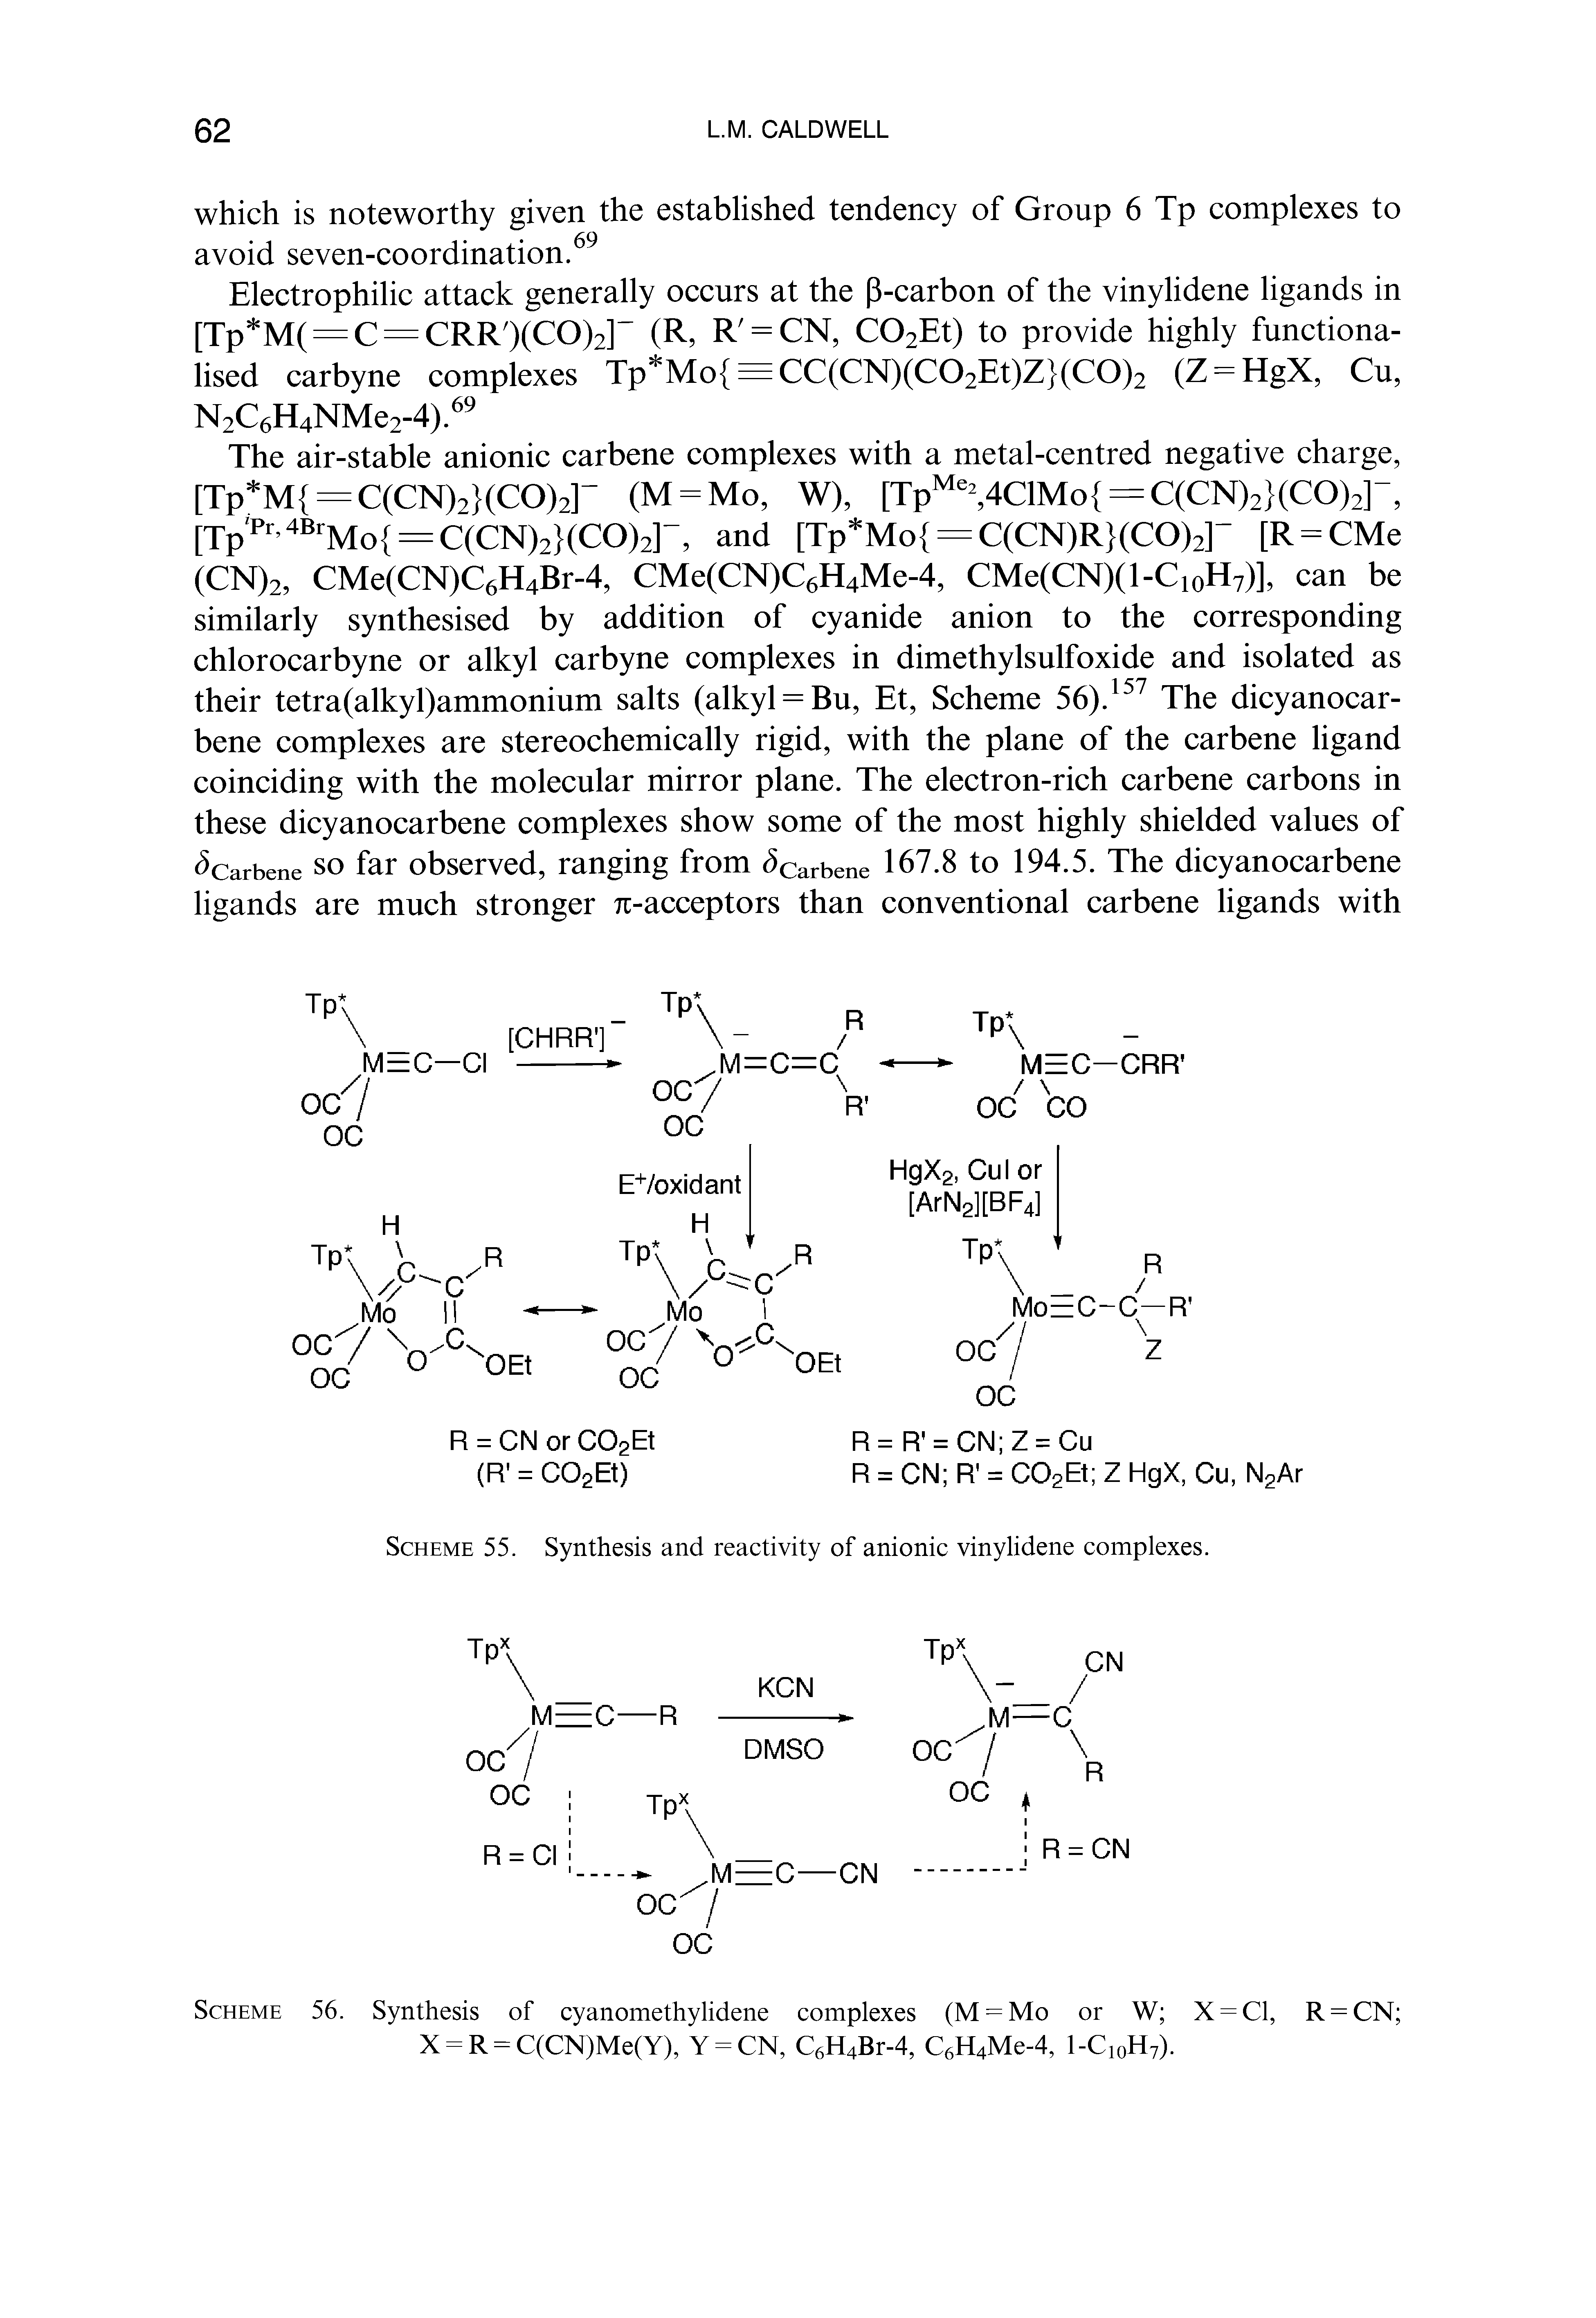 Scheme 55. Synthesis and reactivity of anionic vinylidene complexes.